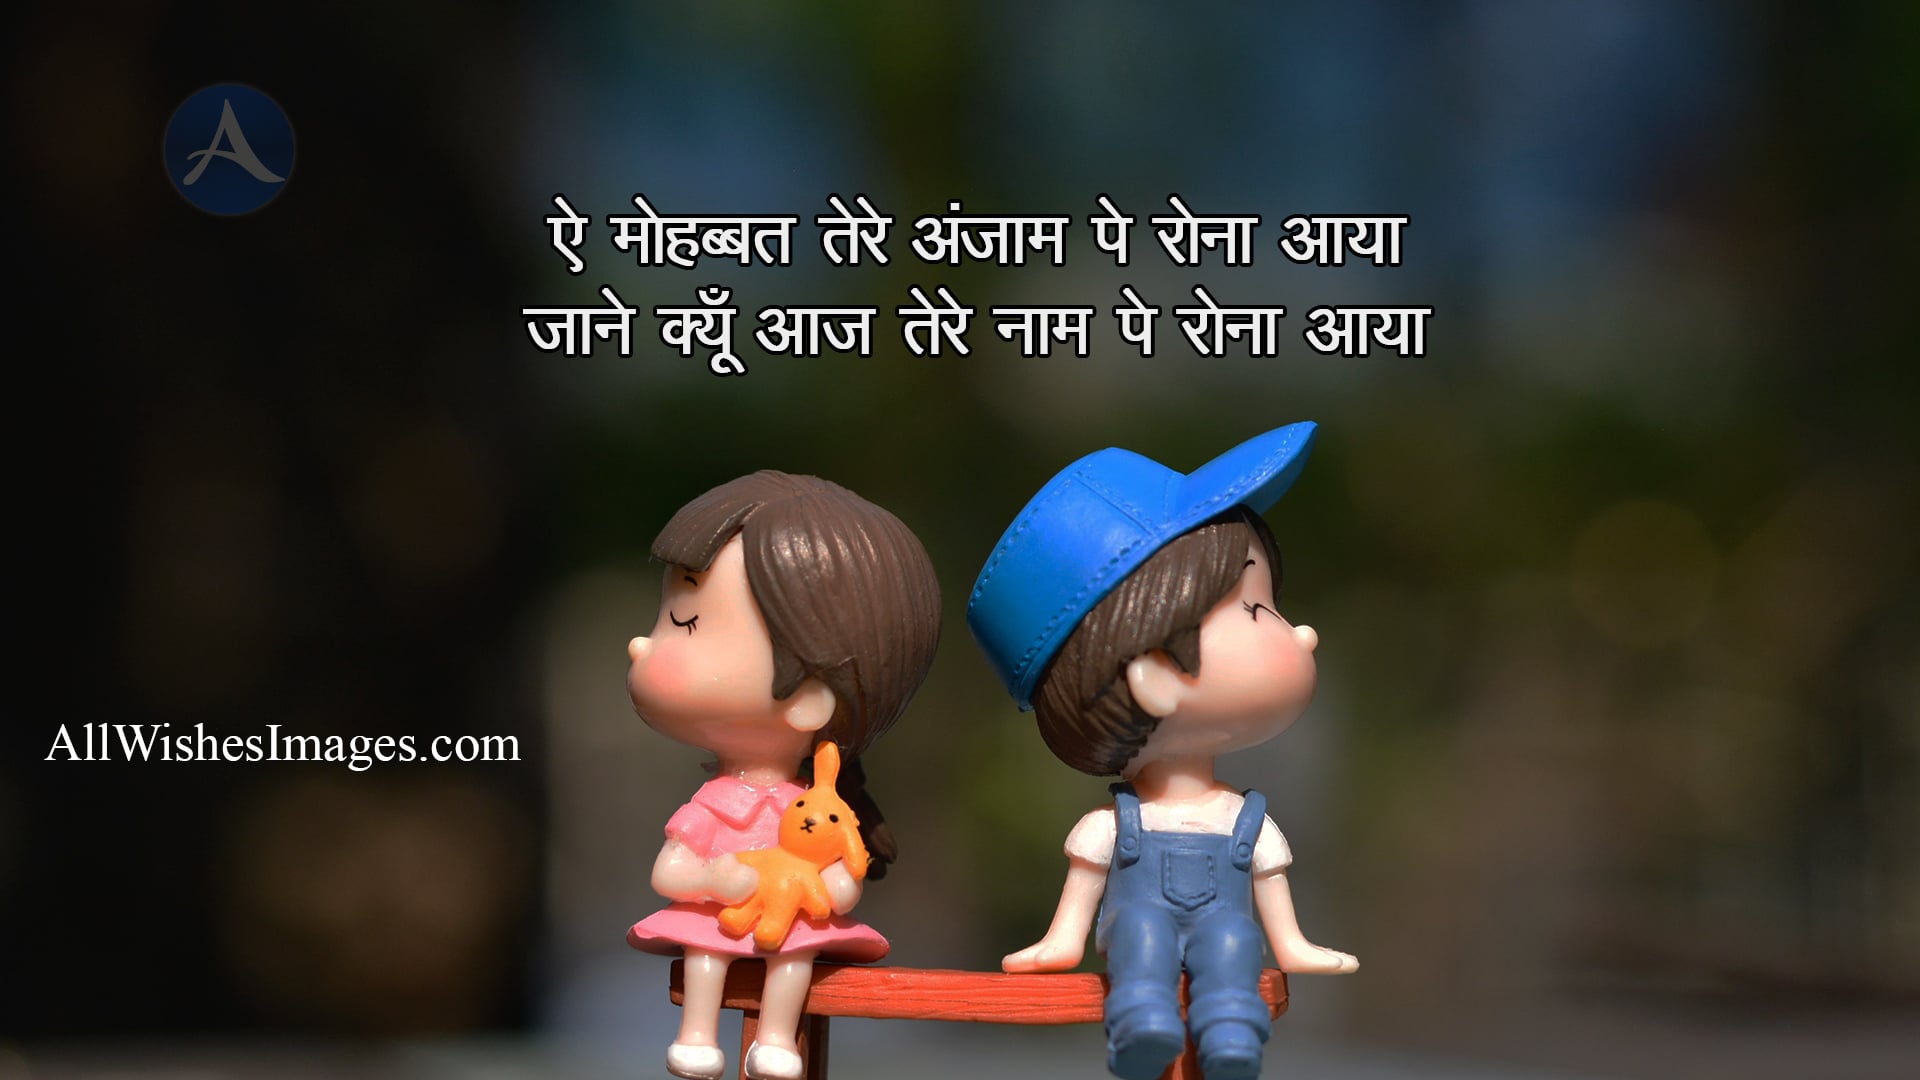 Sad Shayari Images - All Wishes Images - Images for WhatsApp